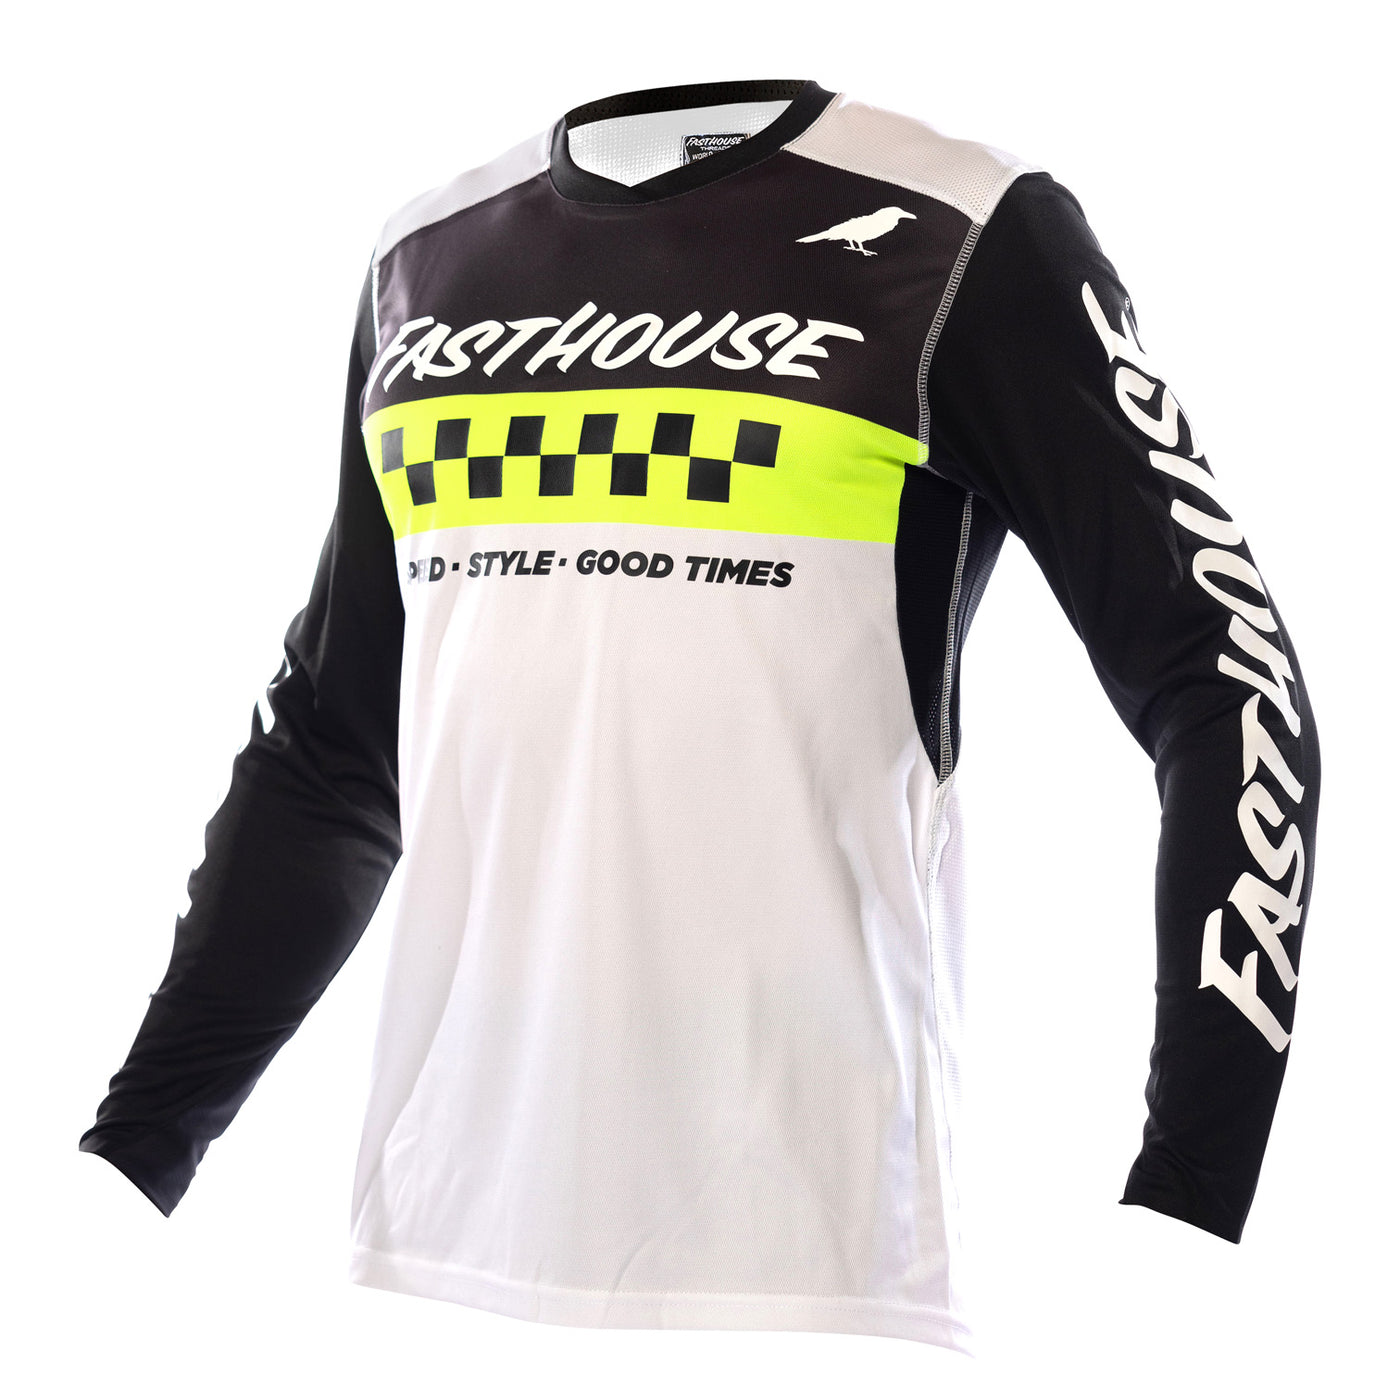 Fasthouse Elrod Jersey